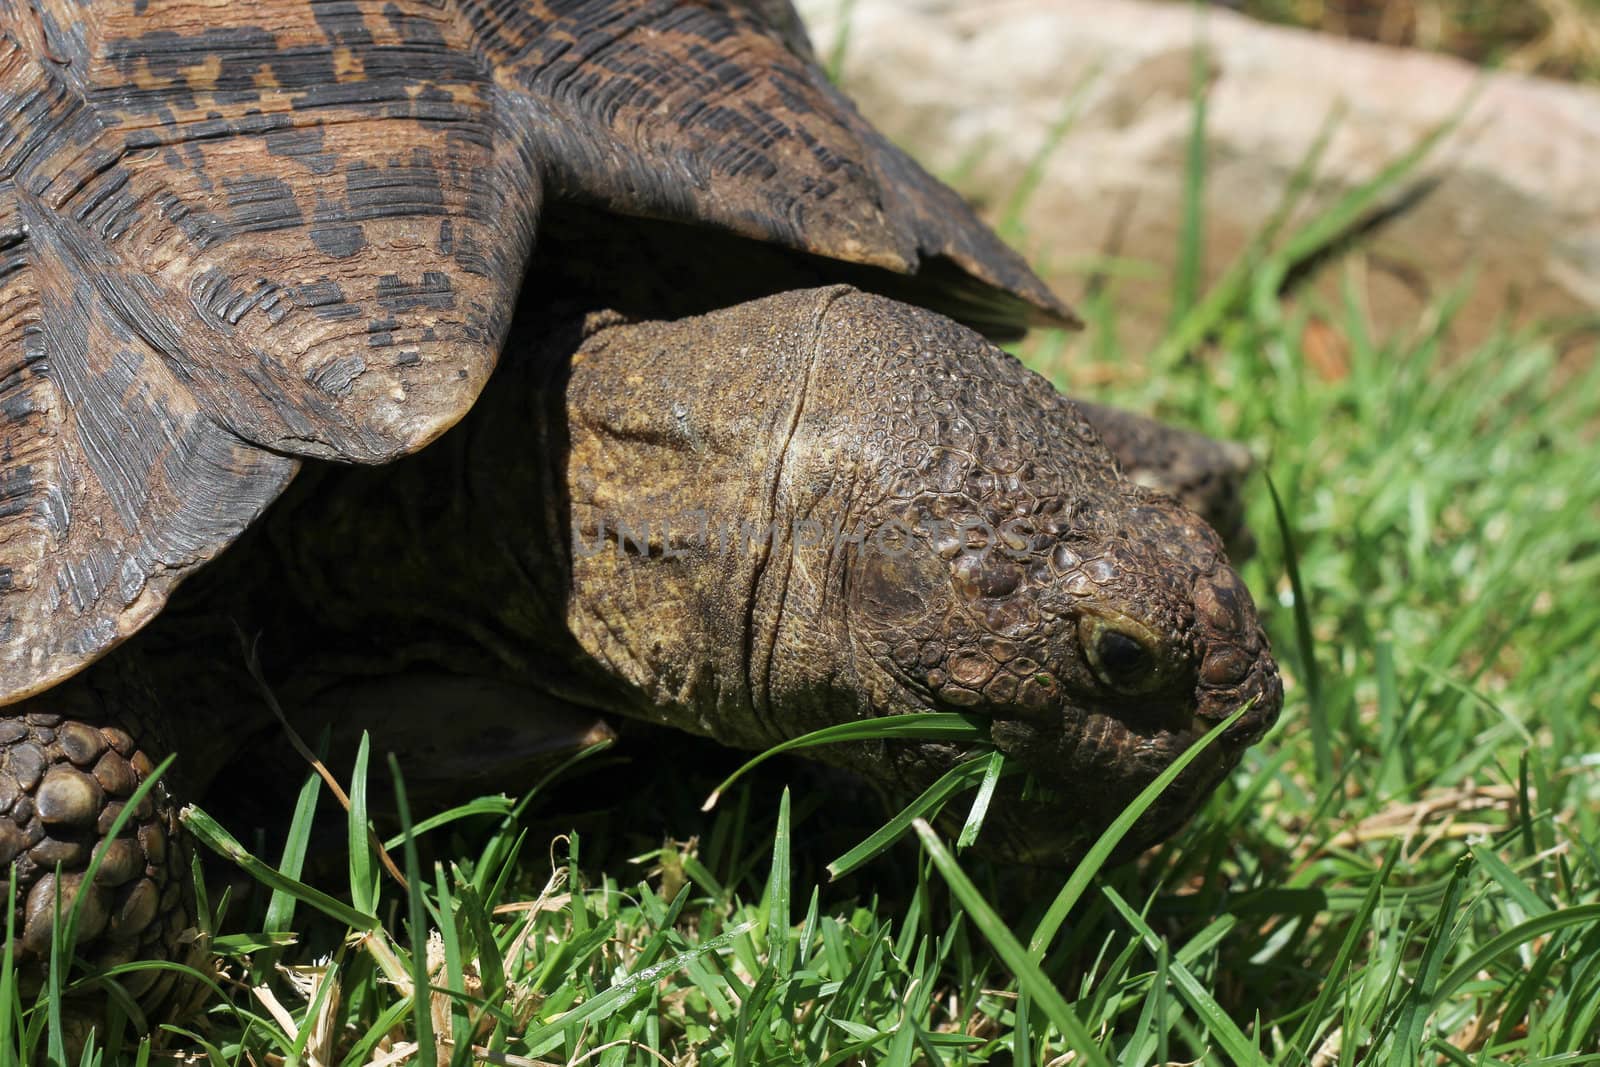 Head of turtle eating grass